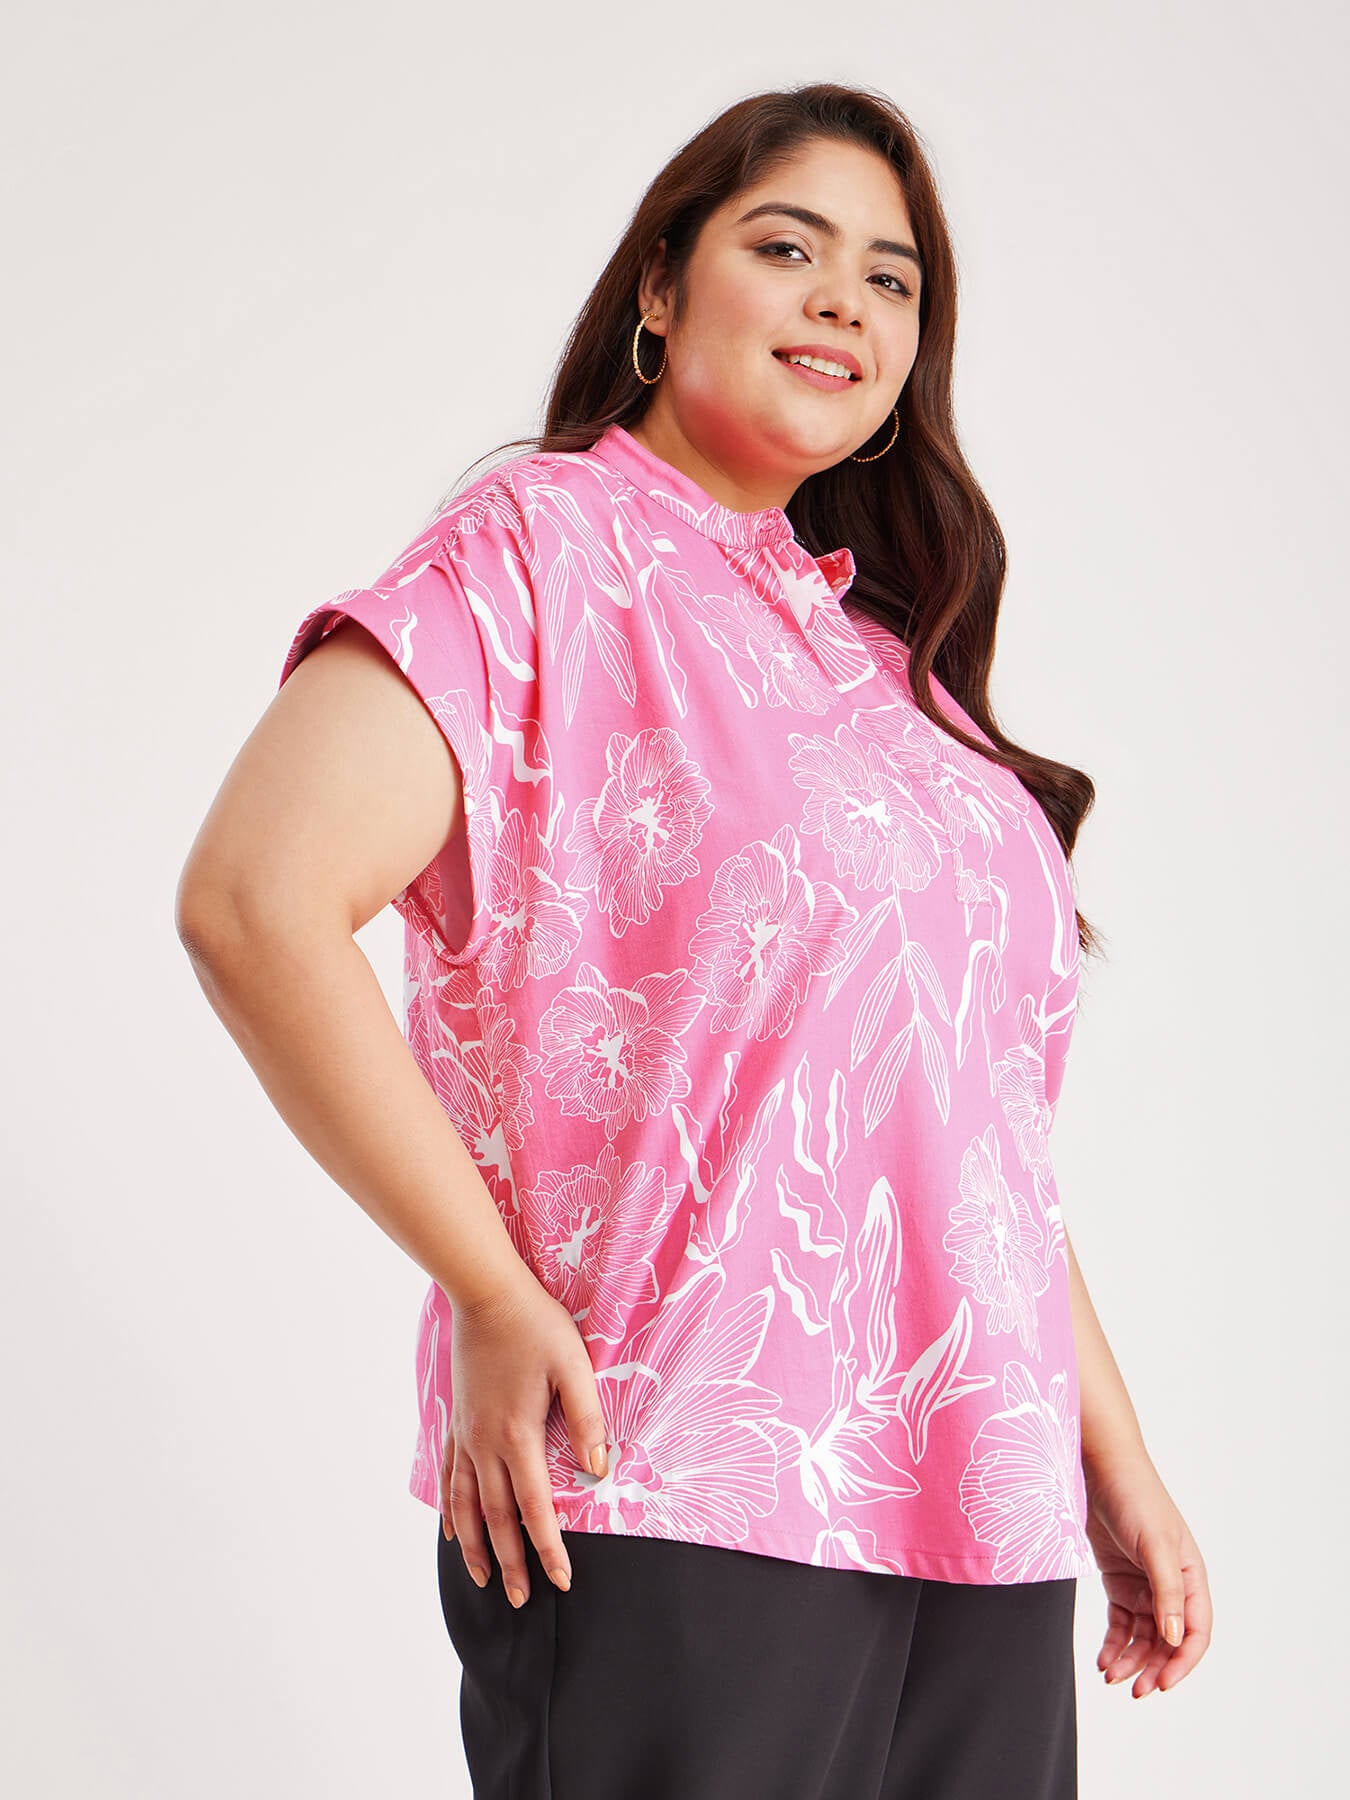 Cotton Drop Shoulder Top - Pink And White